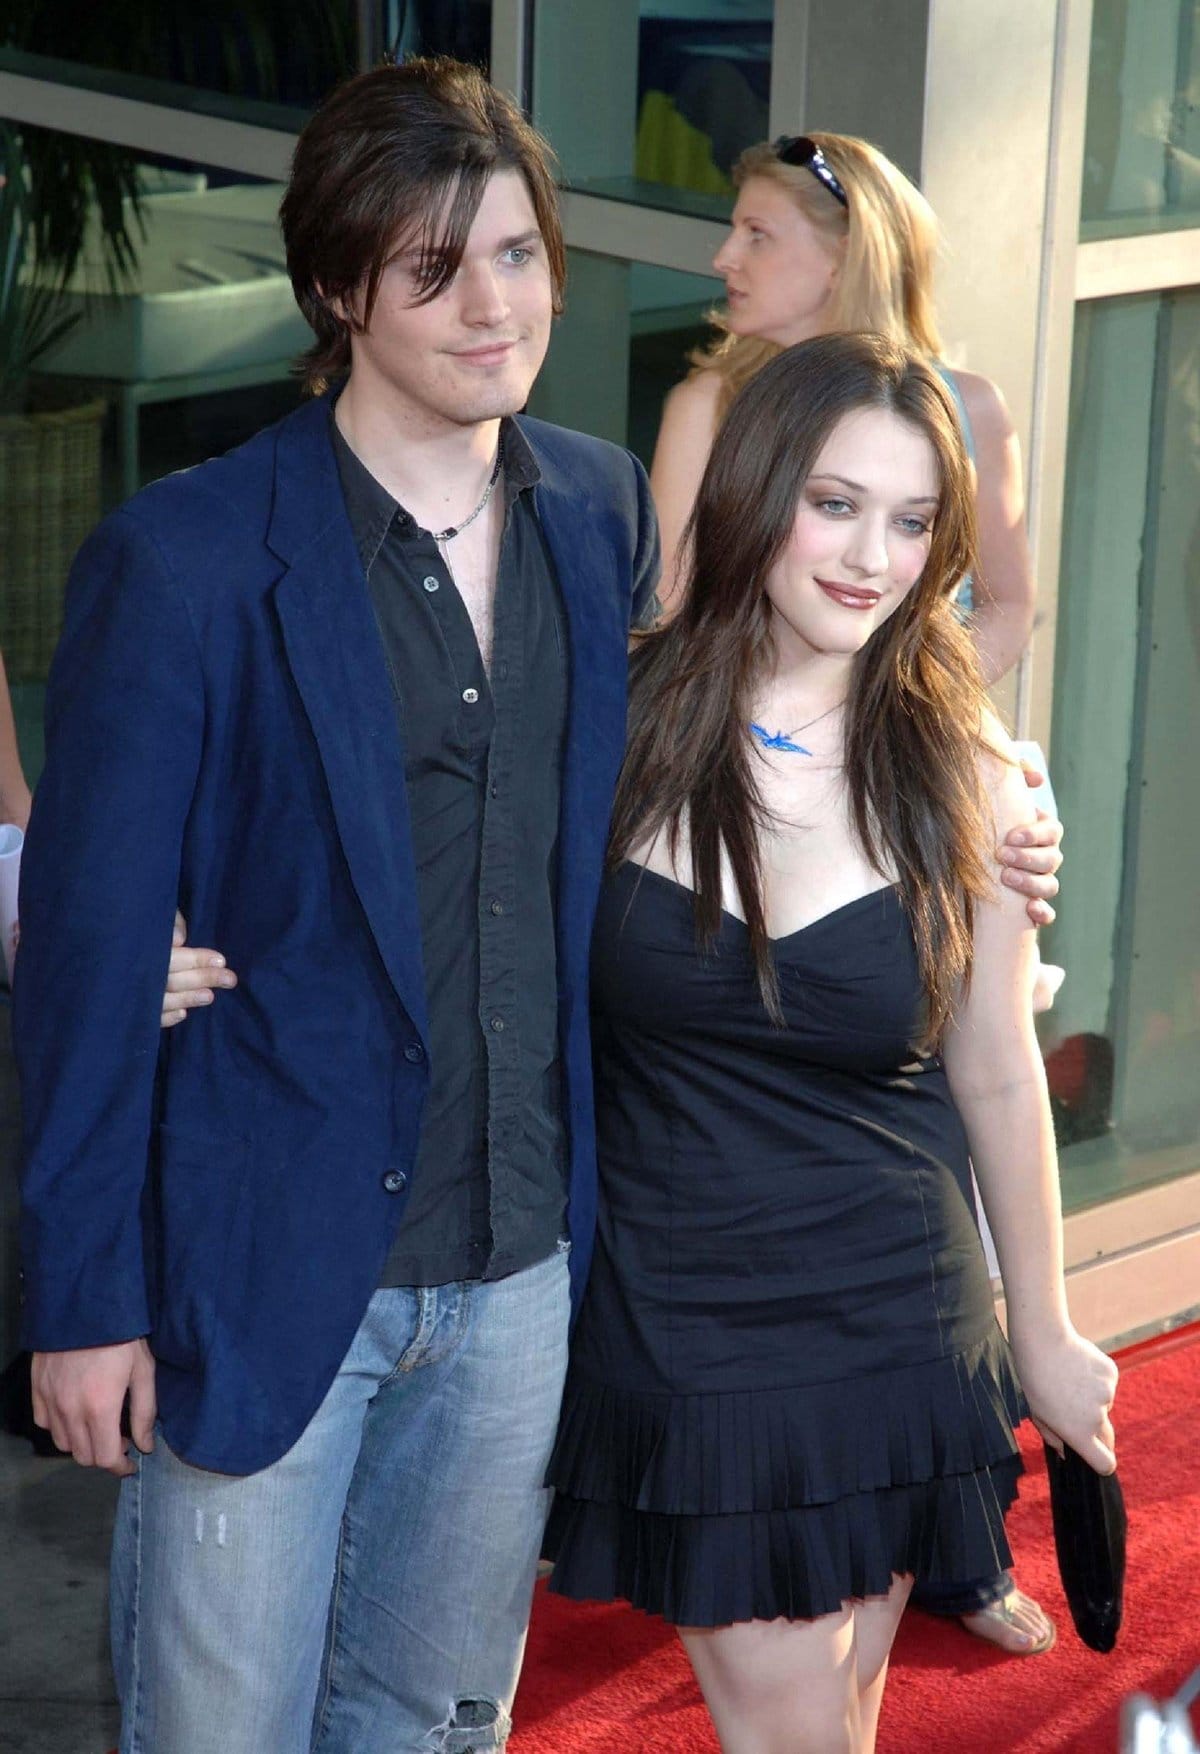 Ira David Wood IV and his girlfriend Kat Dennings attend "The 40 Year Old Virgin" World Premiere